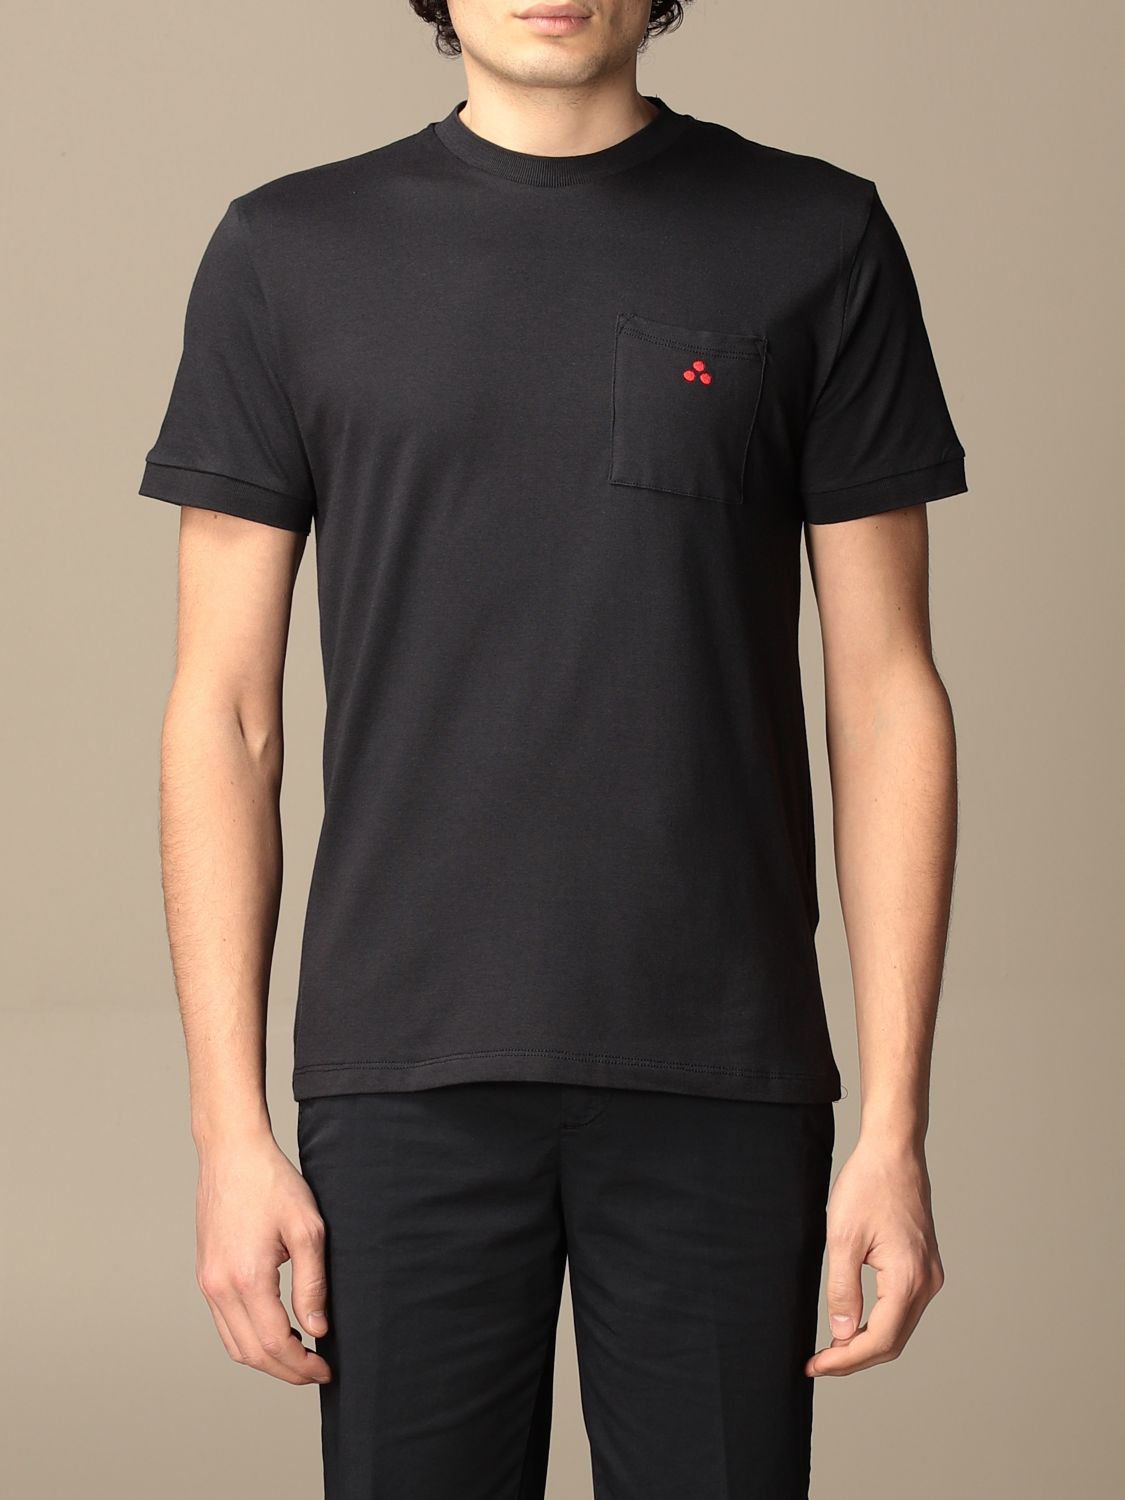 PEUTEREY: cotton T-shirt with pocket and logo - Blue | Peuterey t-shirt ...